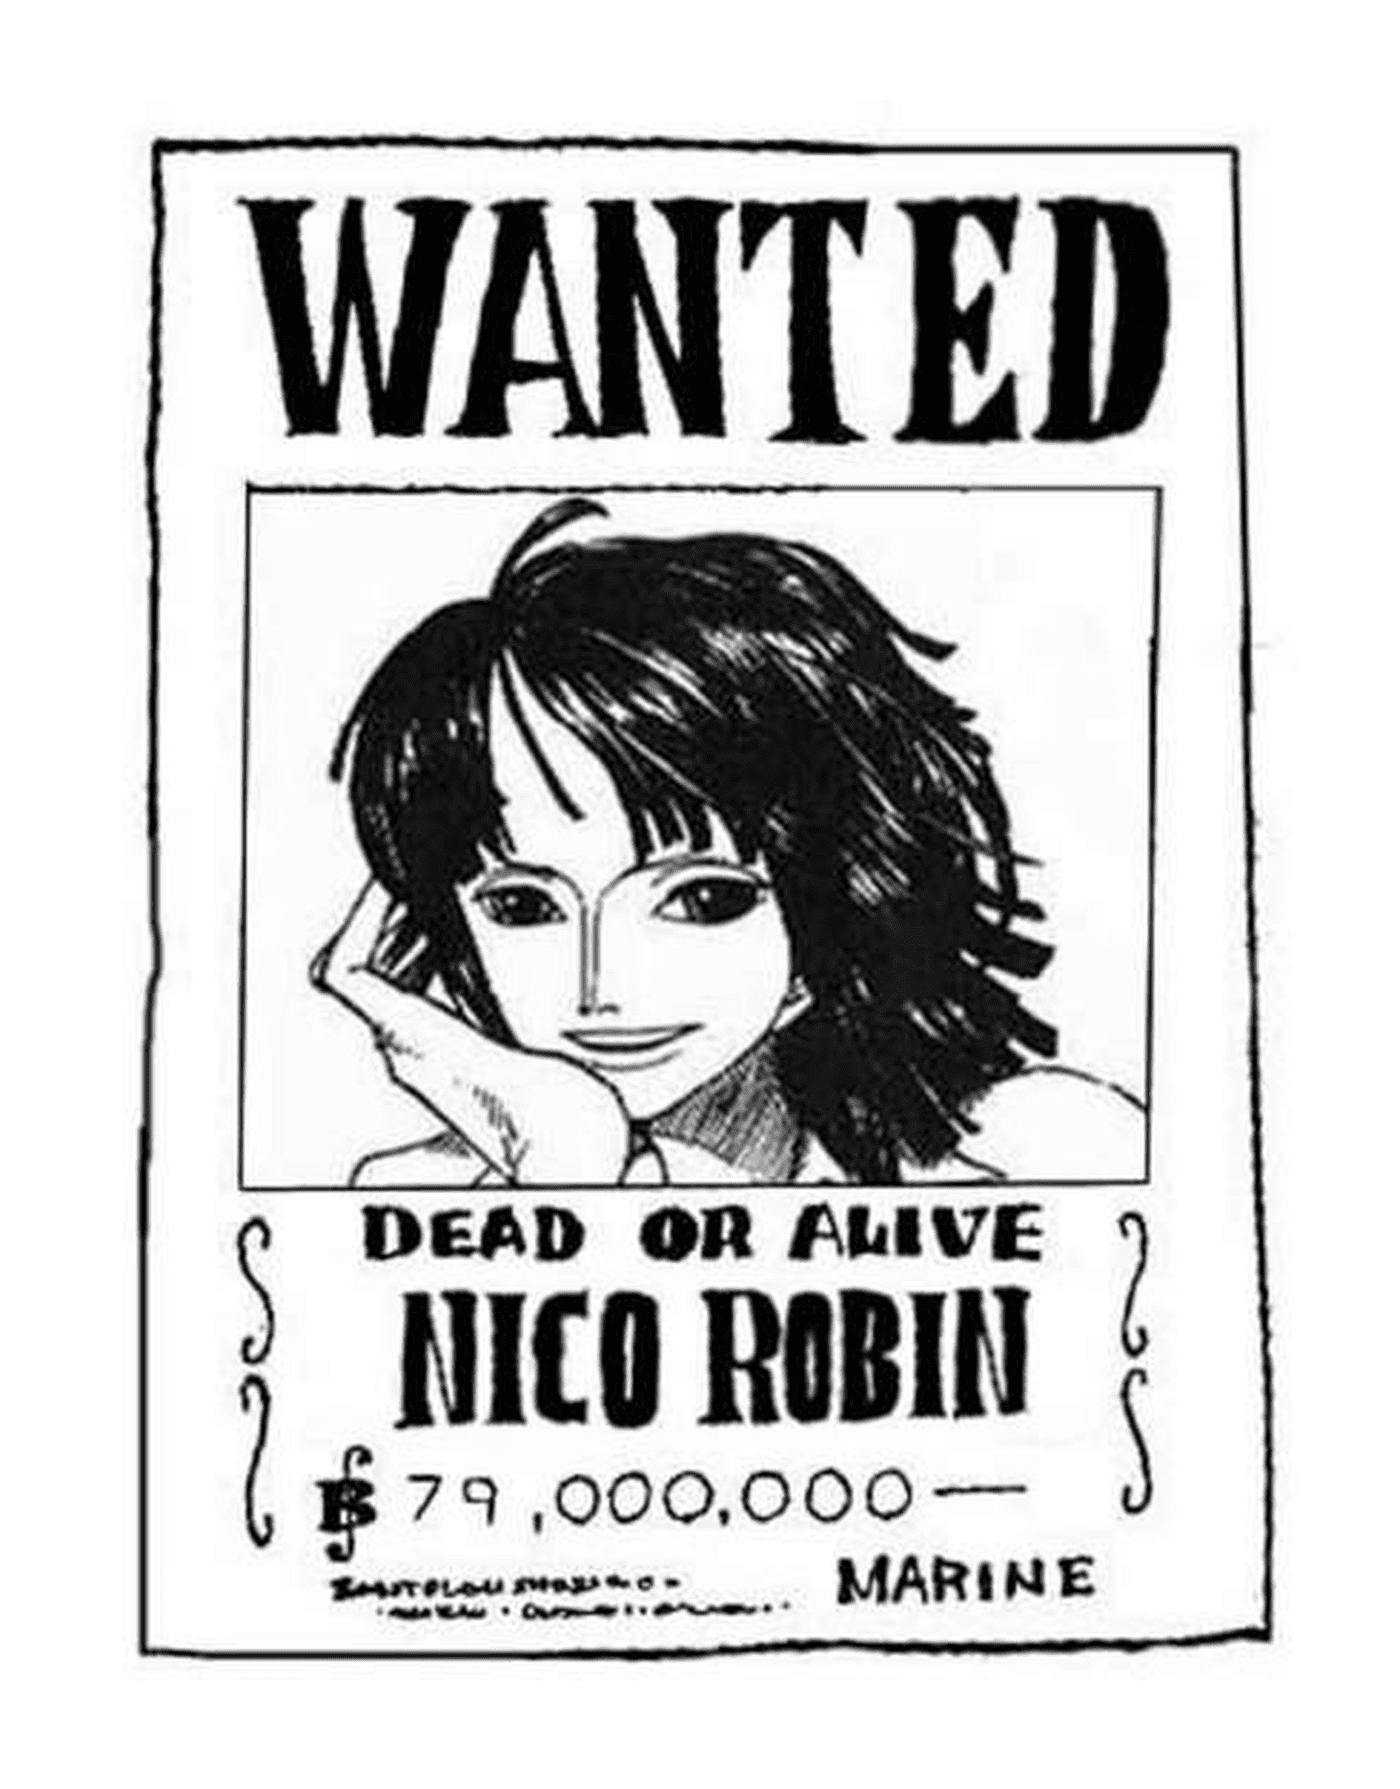  Wanted Nico Robin[20420] Wanted Nico Robin, dead or alive 